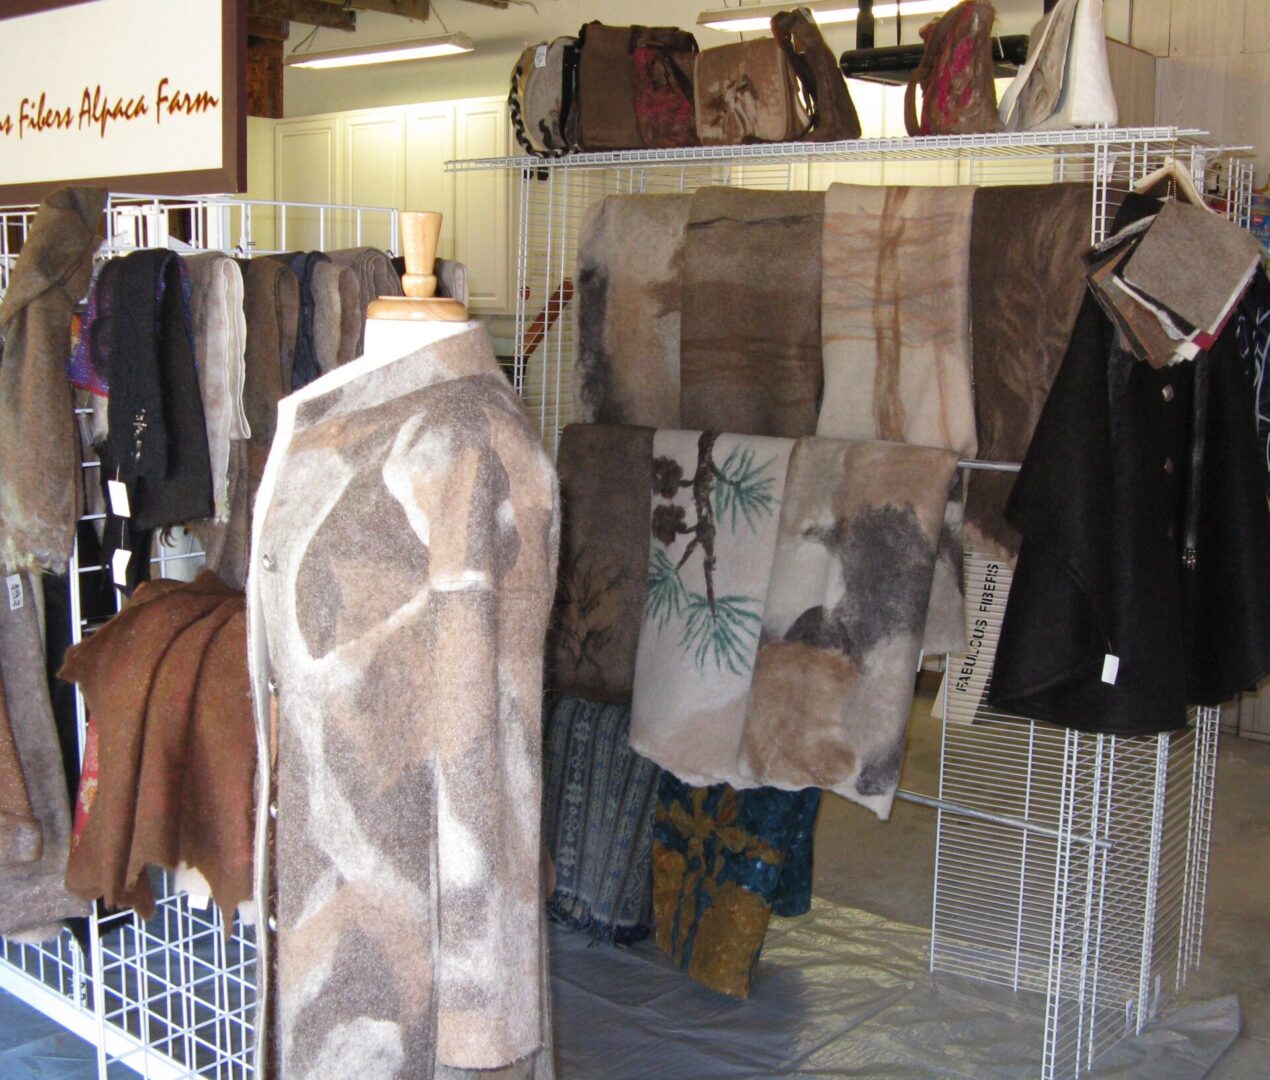 A room with many different types of clothing on display.